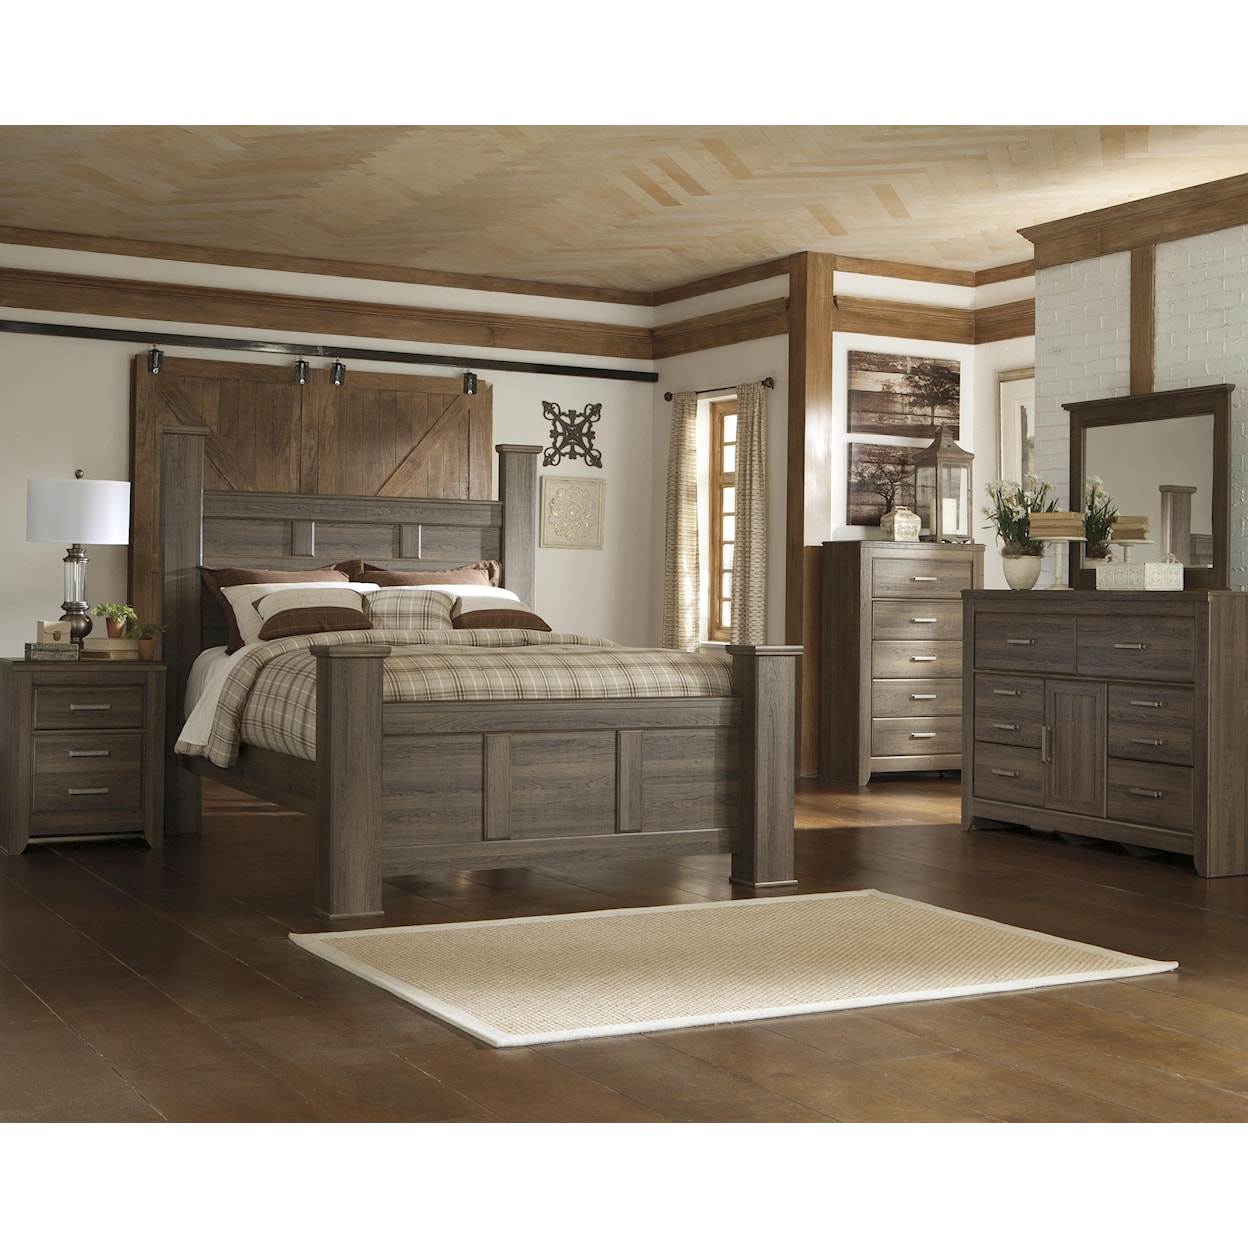 Signature Design by Ashley Furniture Juararo Queen Poster Bed